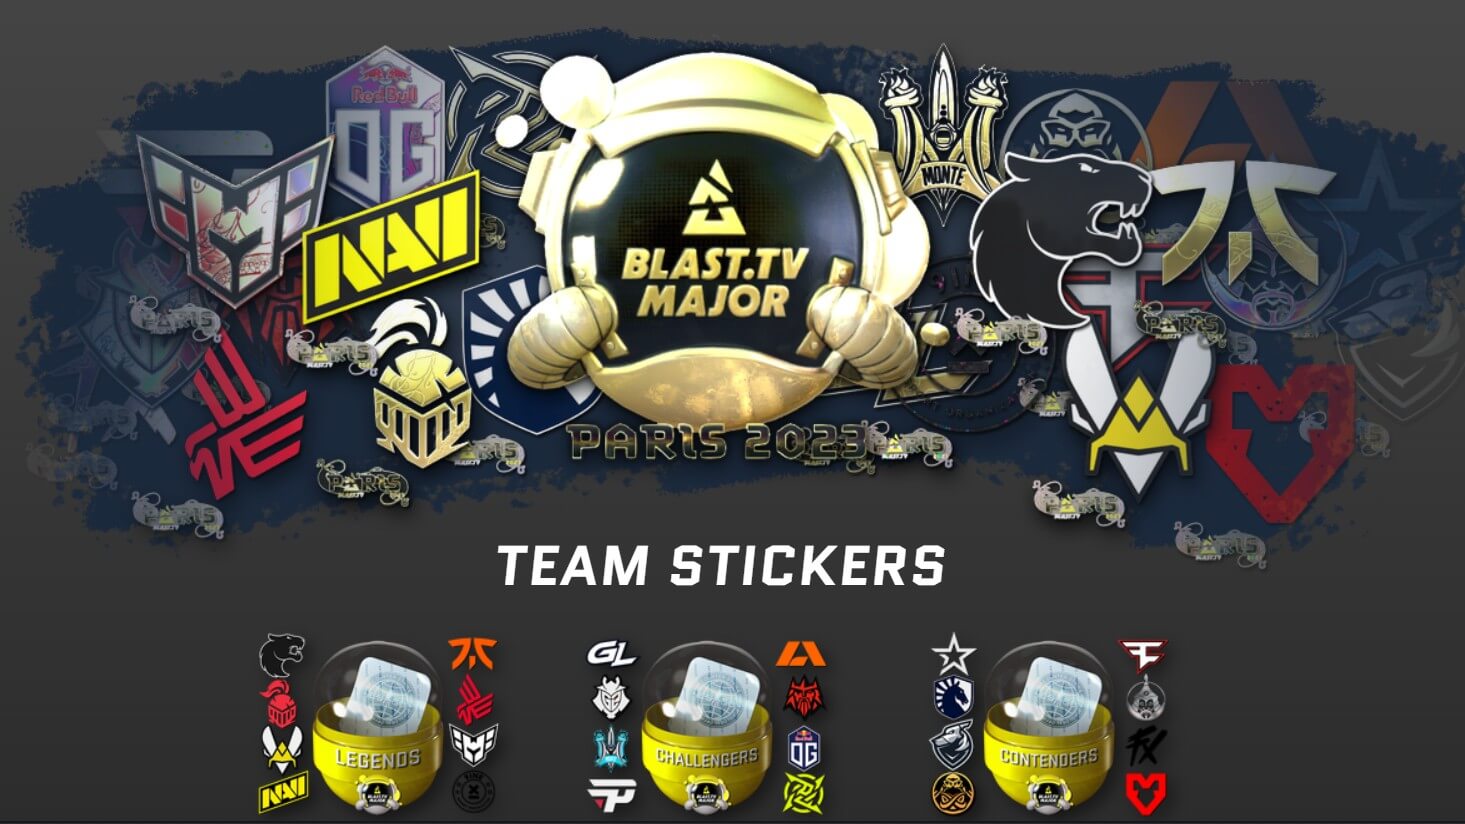 s1mple’s sticker is not the most expensive sticker of the Paris Major